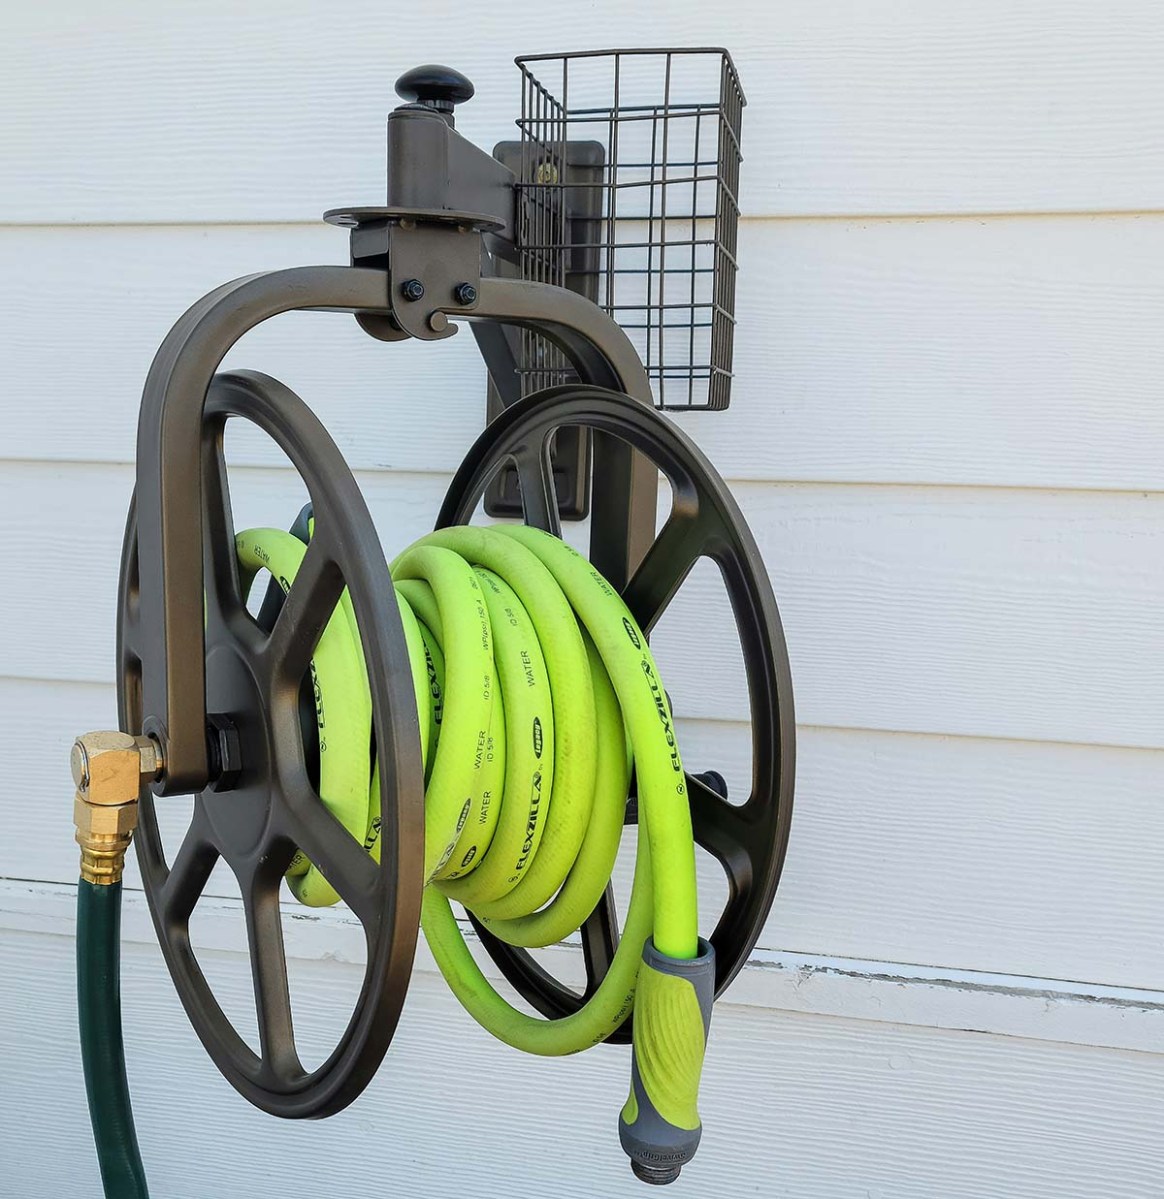 Liberty Hose Reel Review: Is it Worth It? - Tested by Bob Vila